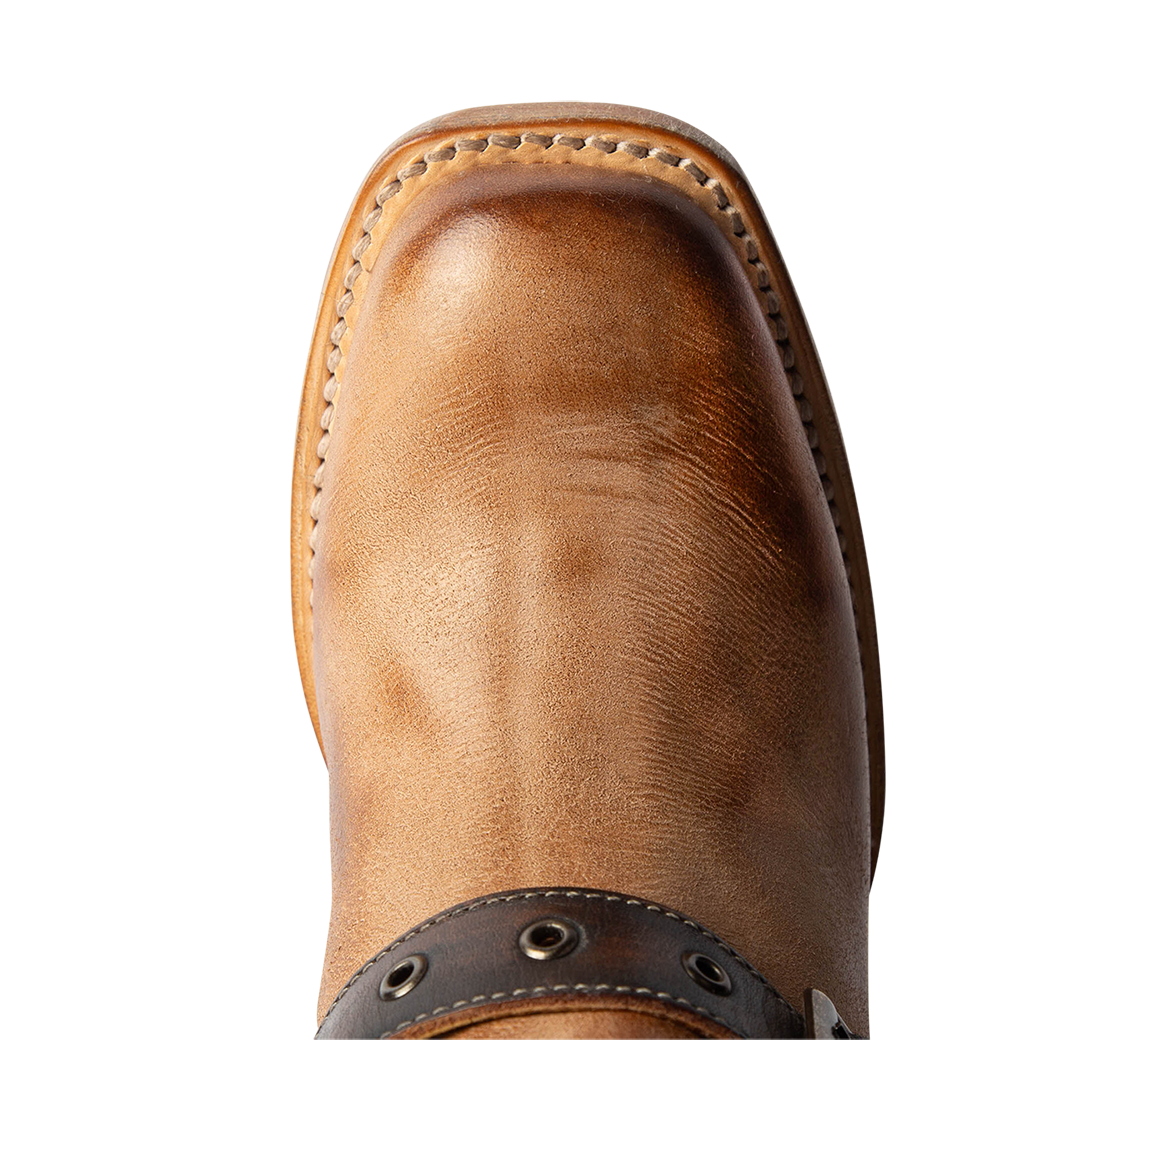 Top view showing square toe construction on FREEBIRD women's Derby beige leather boot